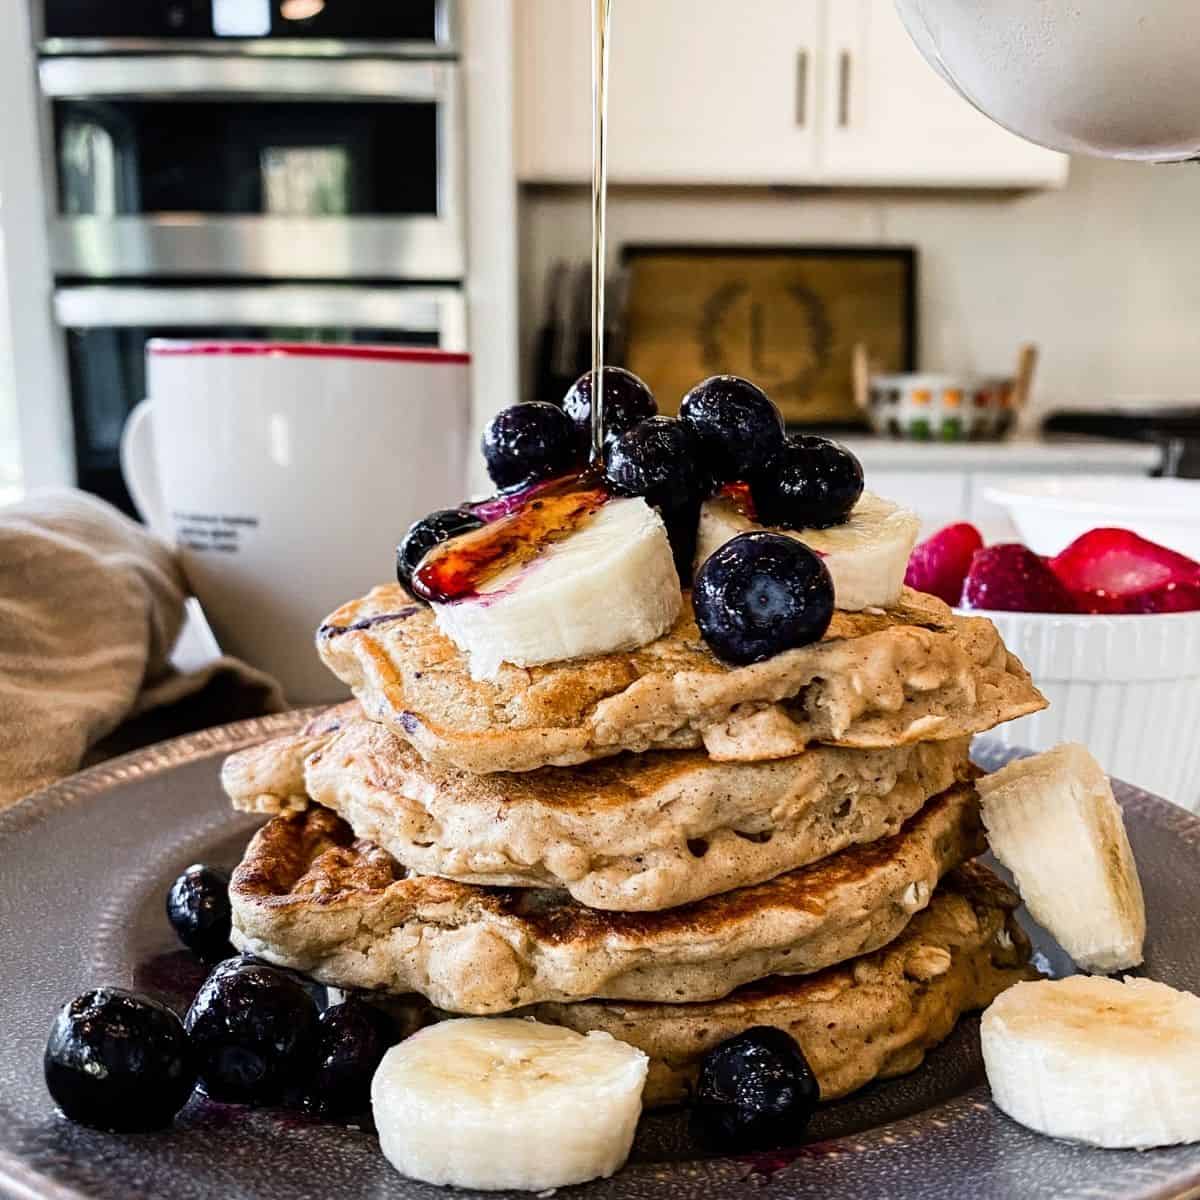 Syrup being poured over a stack of vegan oatmeal banana pancakes topped with bananas, blueberries. 